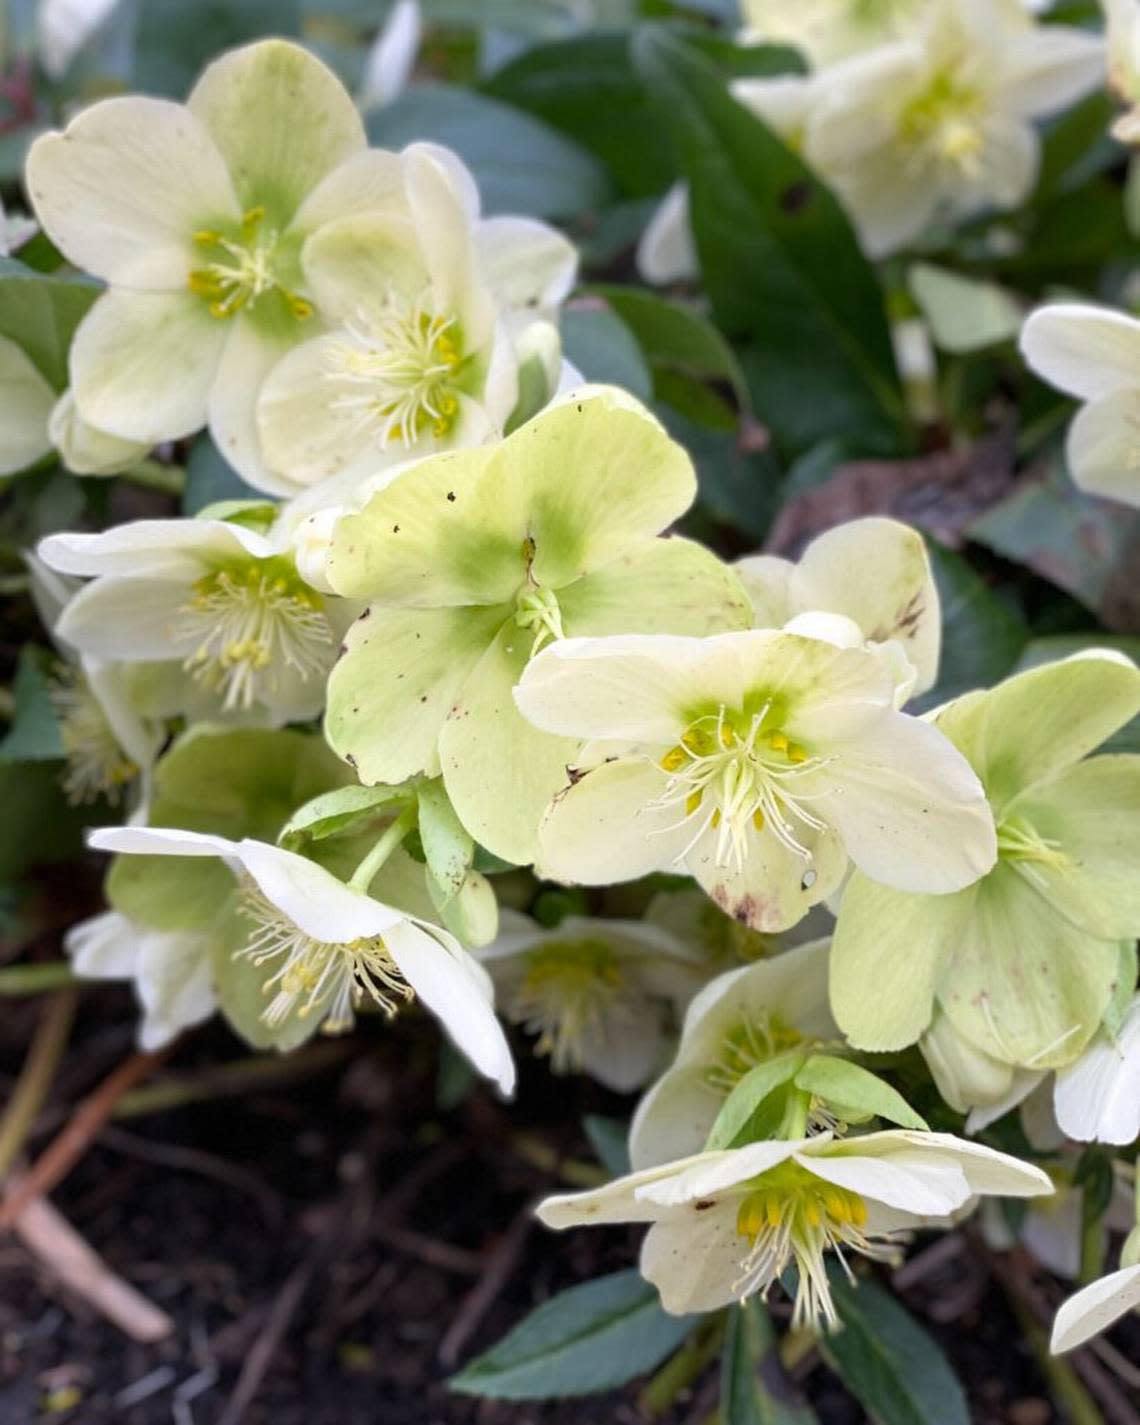 In shady corners and under trees, hellebores open their vibrant blooms against dark green foliage.